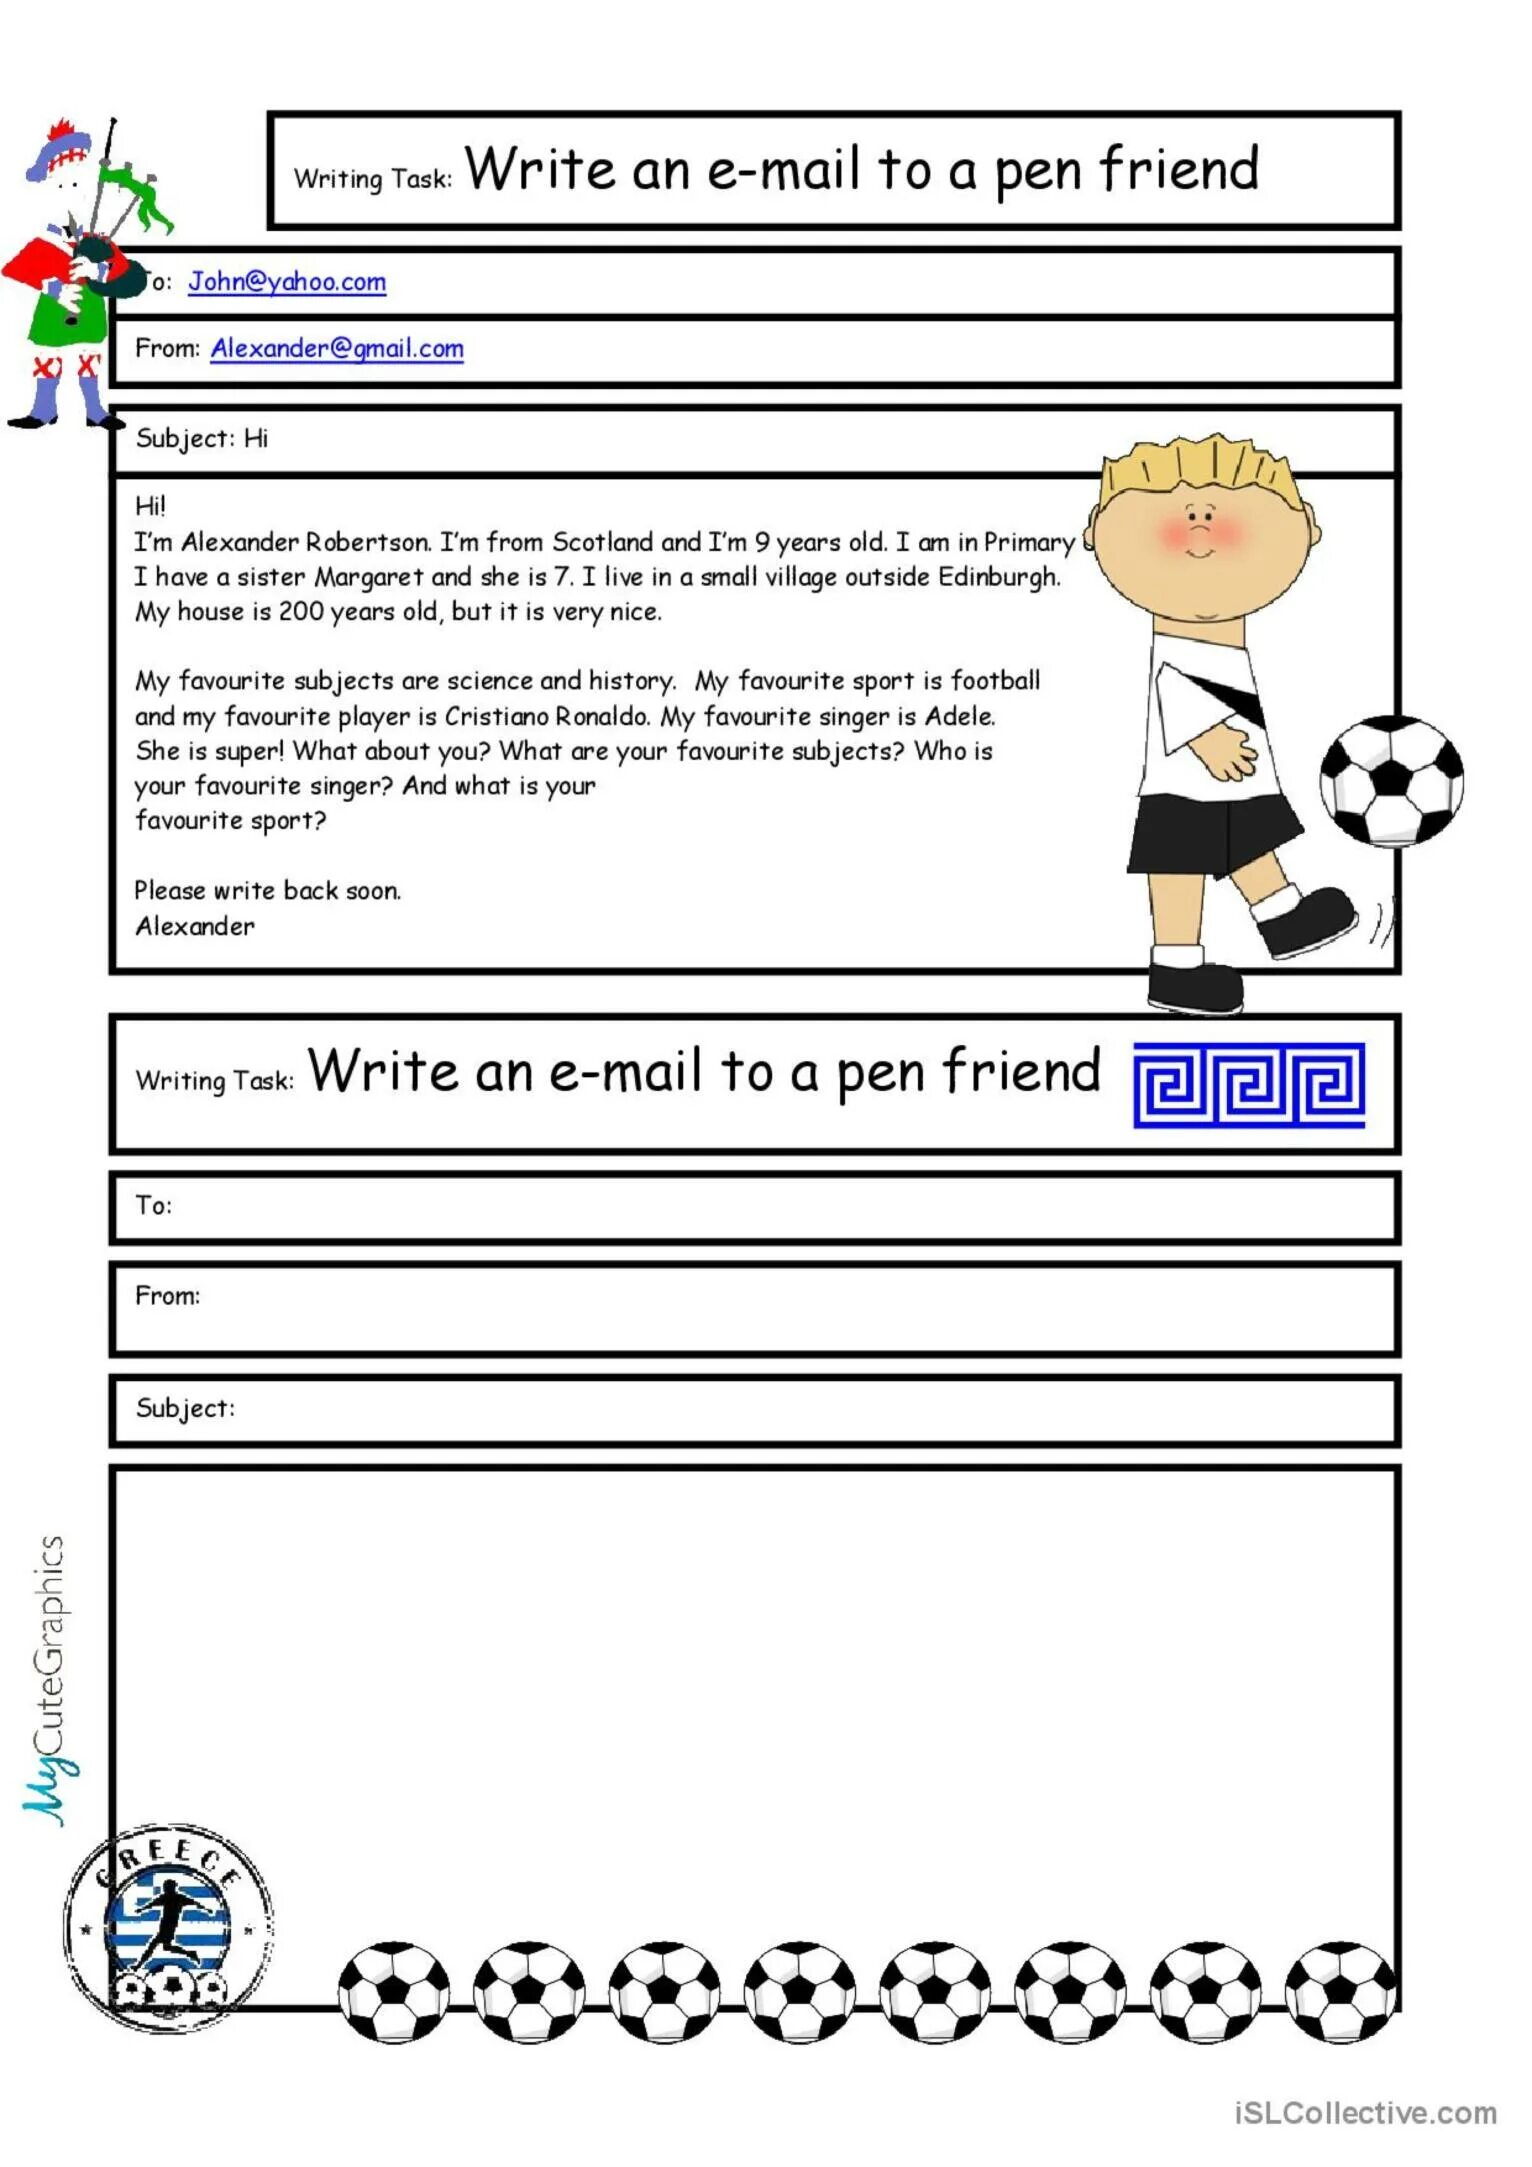 Writing an email 5 класс. Writing Formal email Worksheets. Writing an email Worksheets. Writing a Letter to a friend Worksheets. Task your pen friend